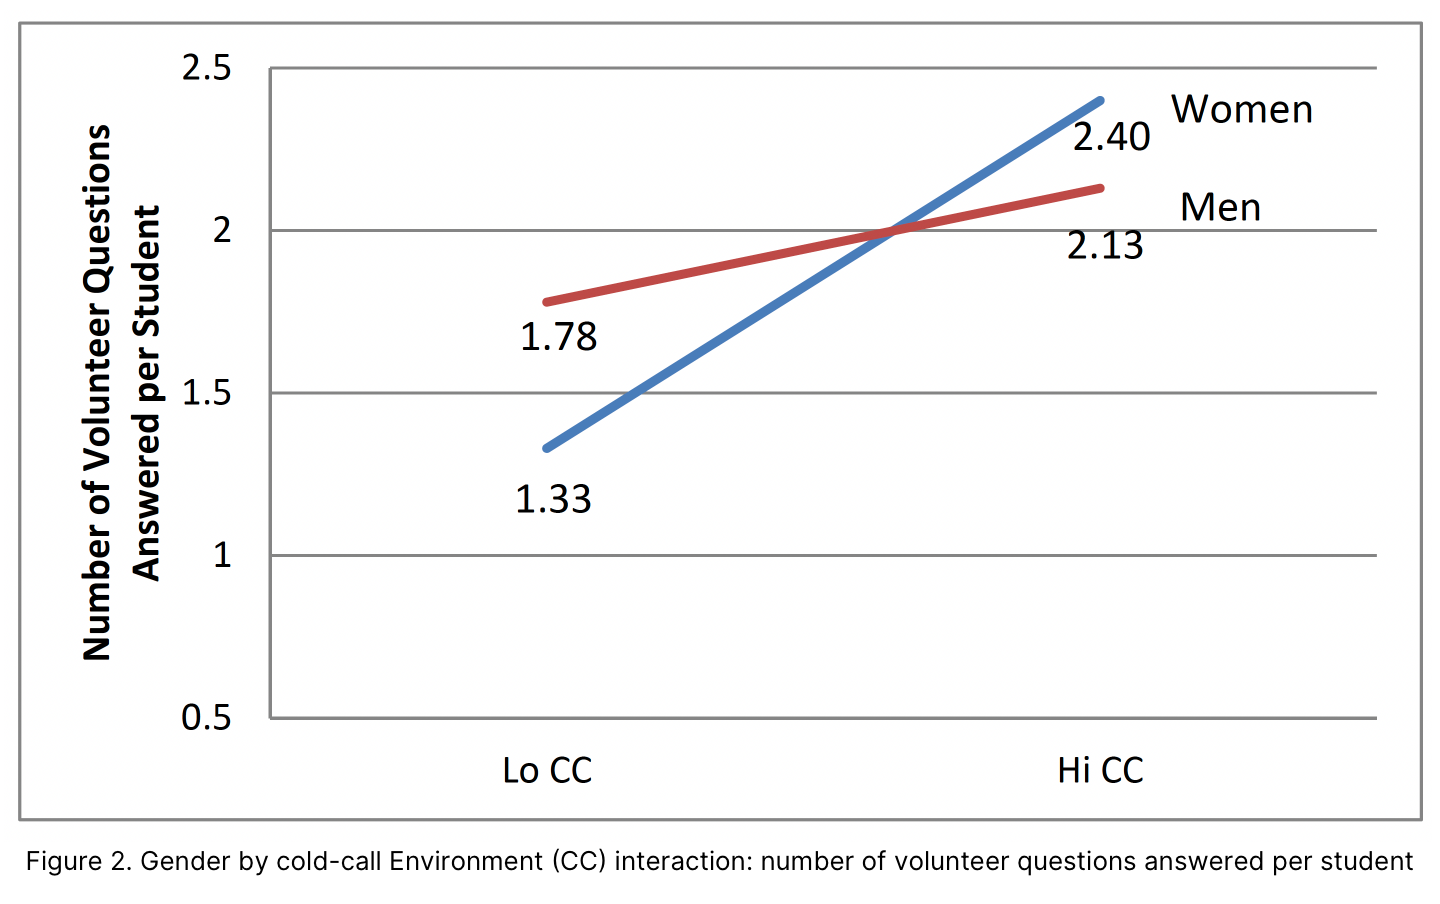 Figure 2. Gender by cold-call Environment (CC) interaction: number of volunteer questions answered per student